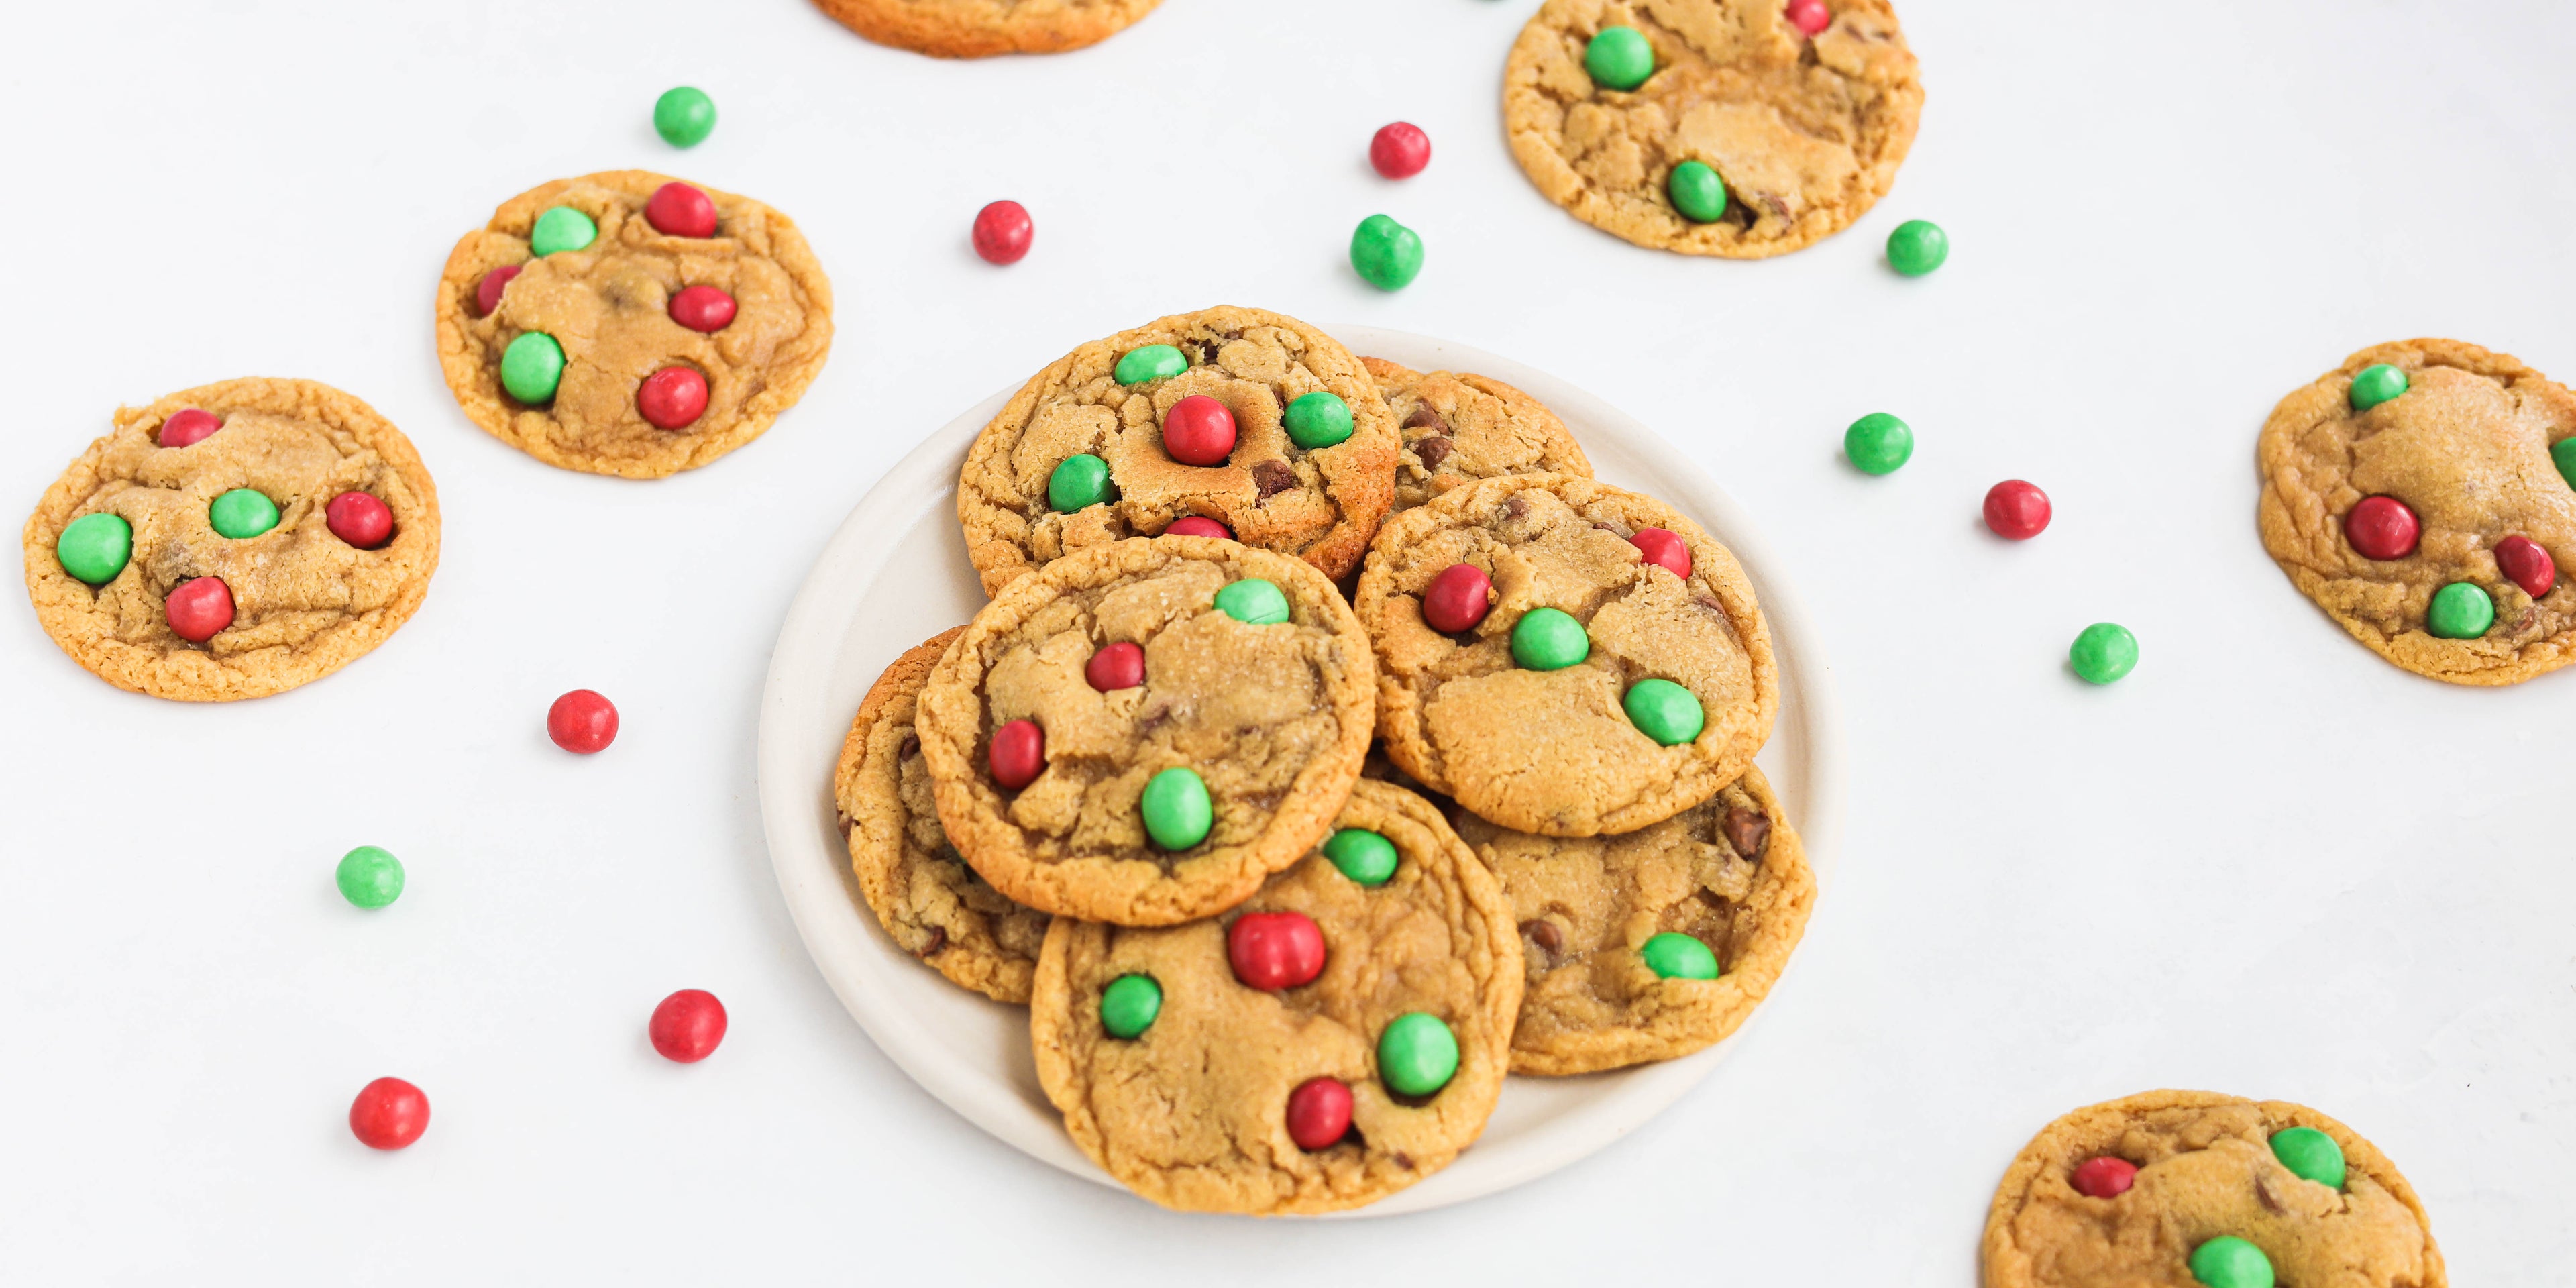 Copycat Millies Cookies filled with green and red m&m's for Christmas